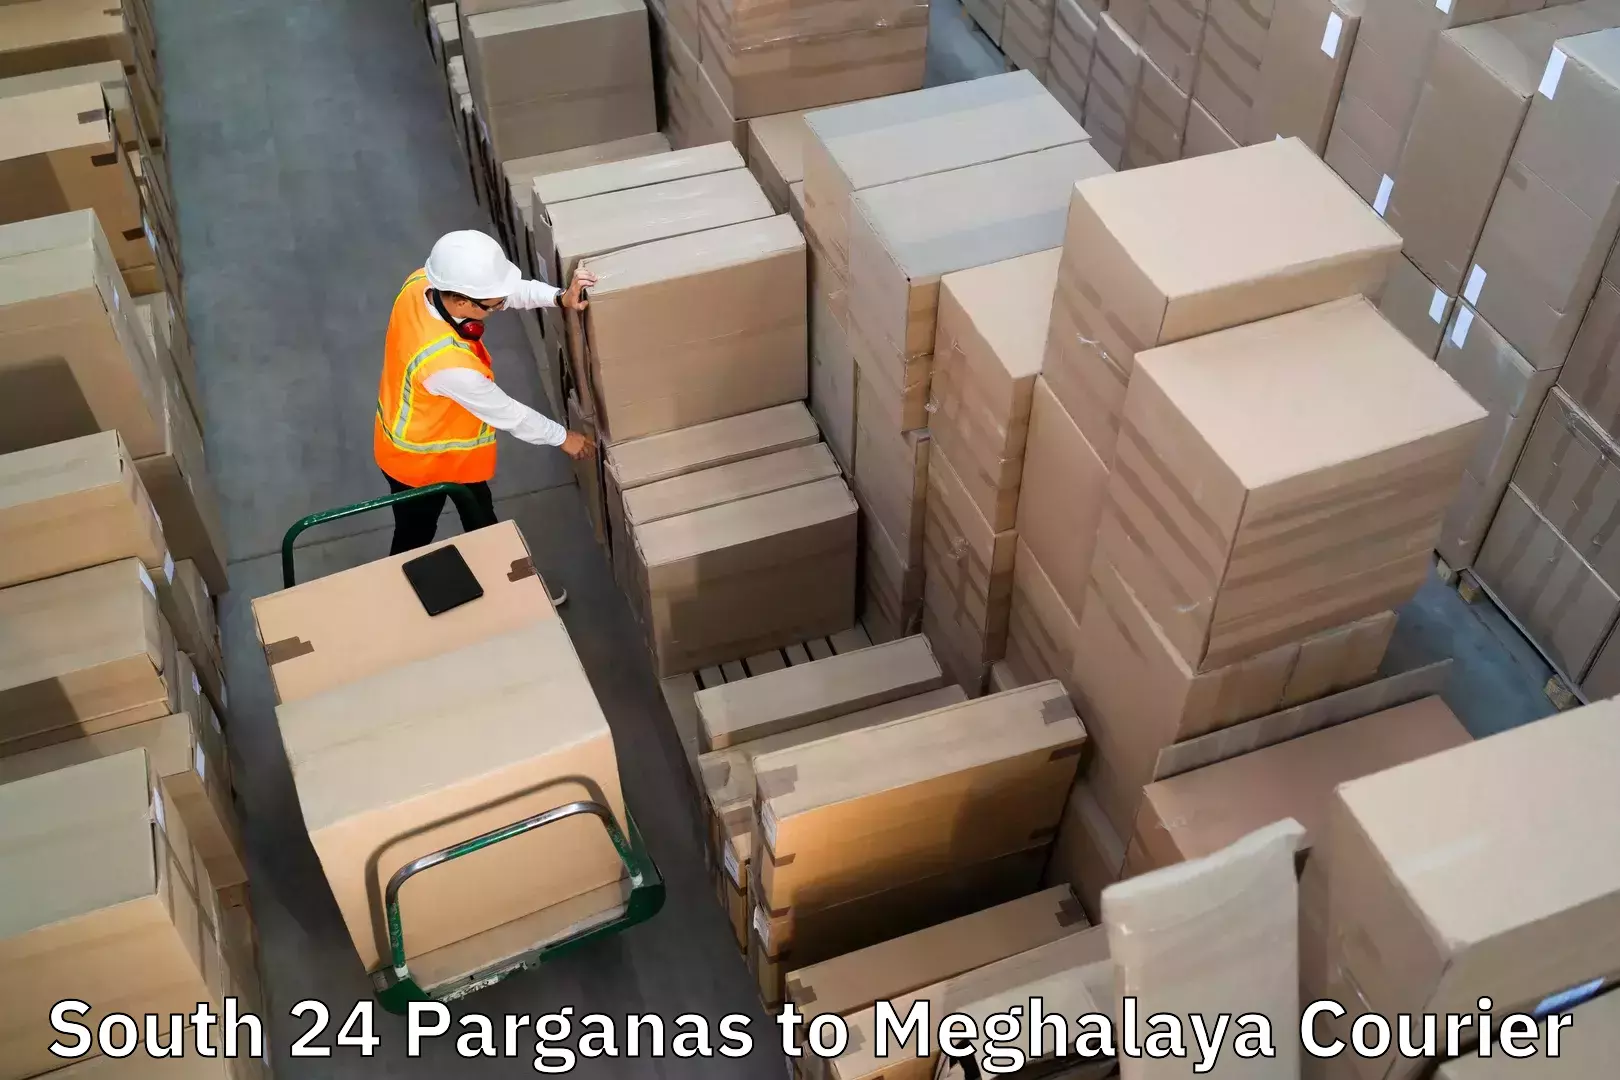 Personal effects shipping South 24 Parganas to Meghalaya